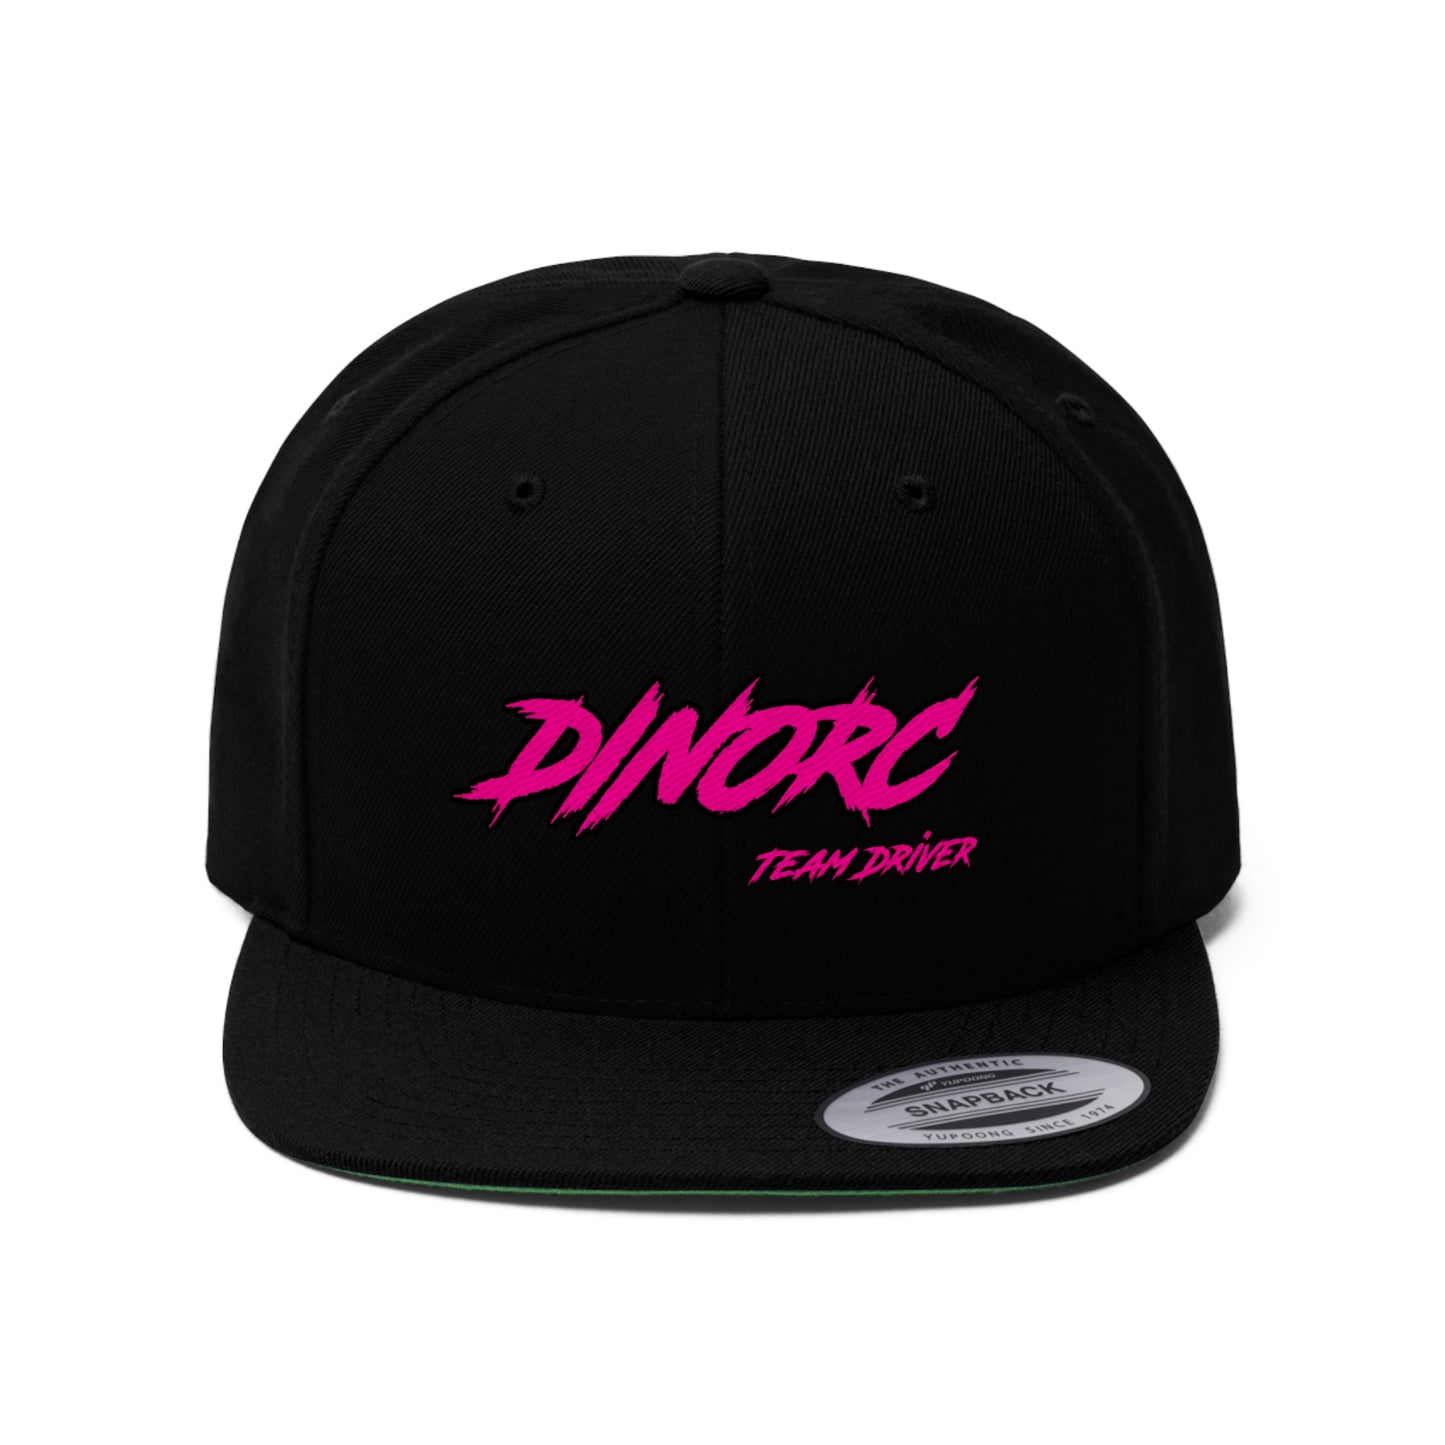 5 different colors and designs of DinoRC Logoed Flat Bill Hat